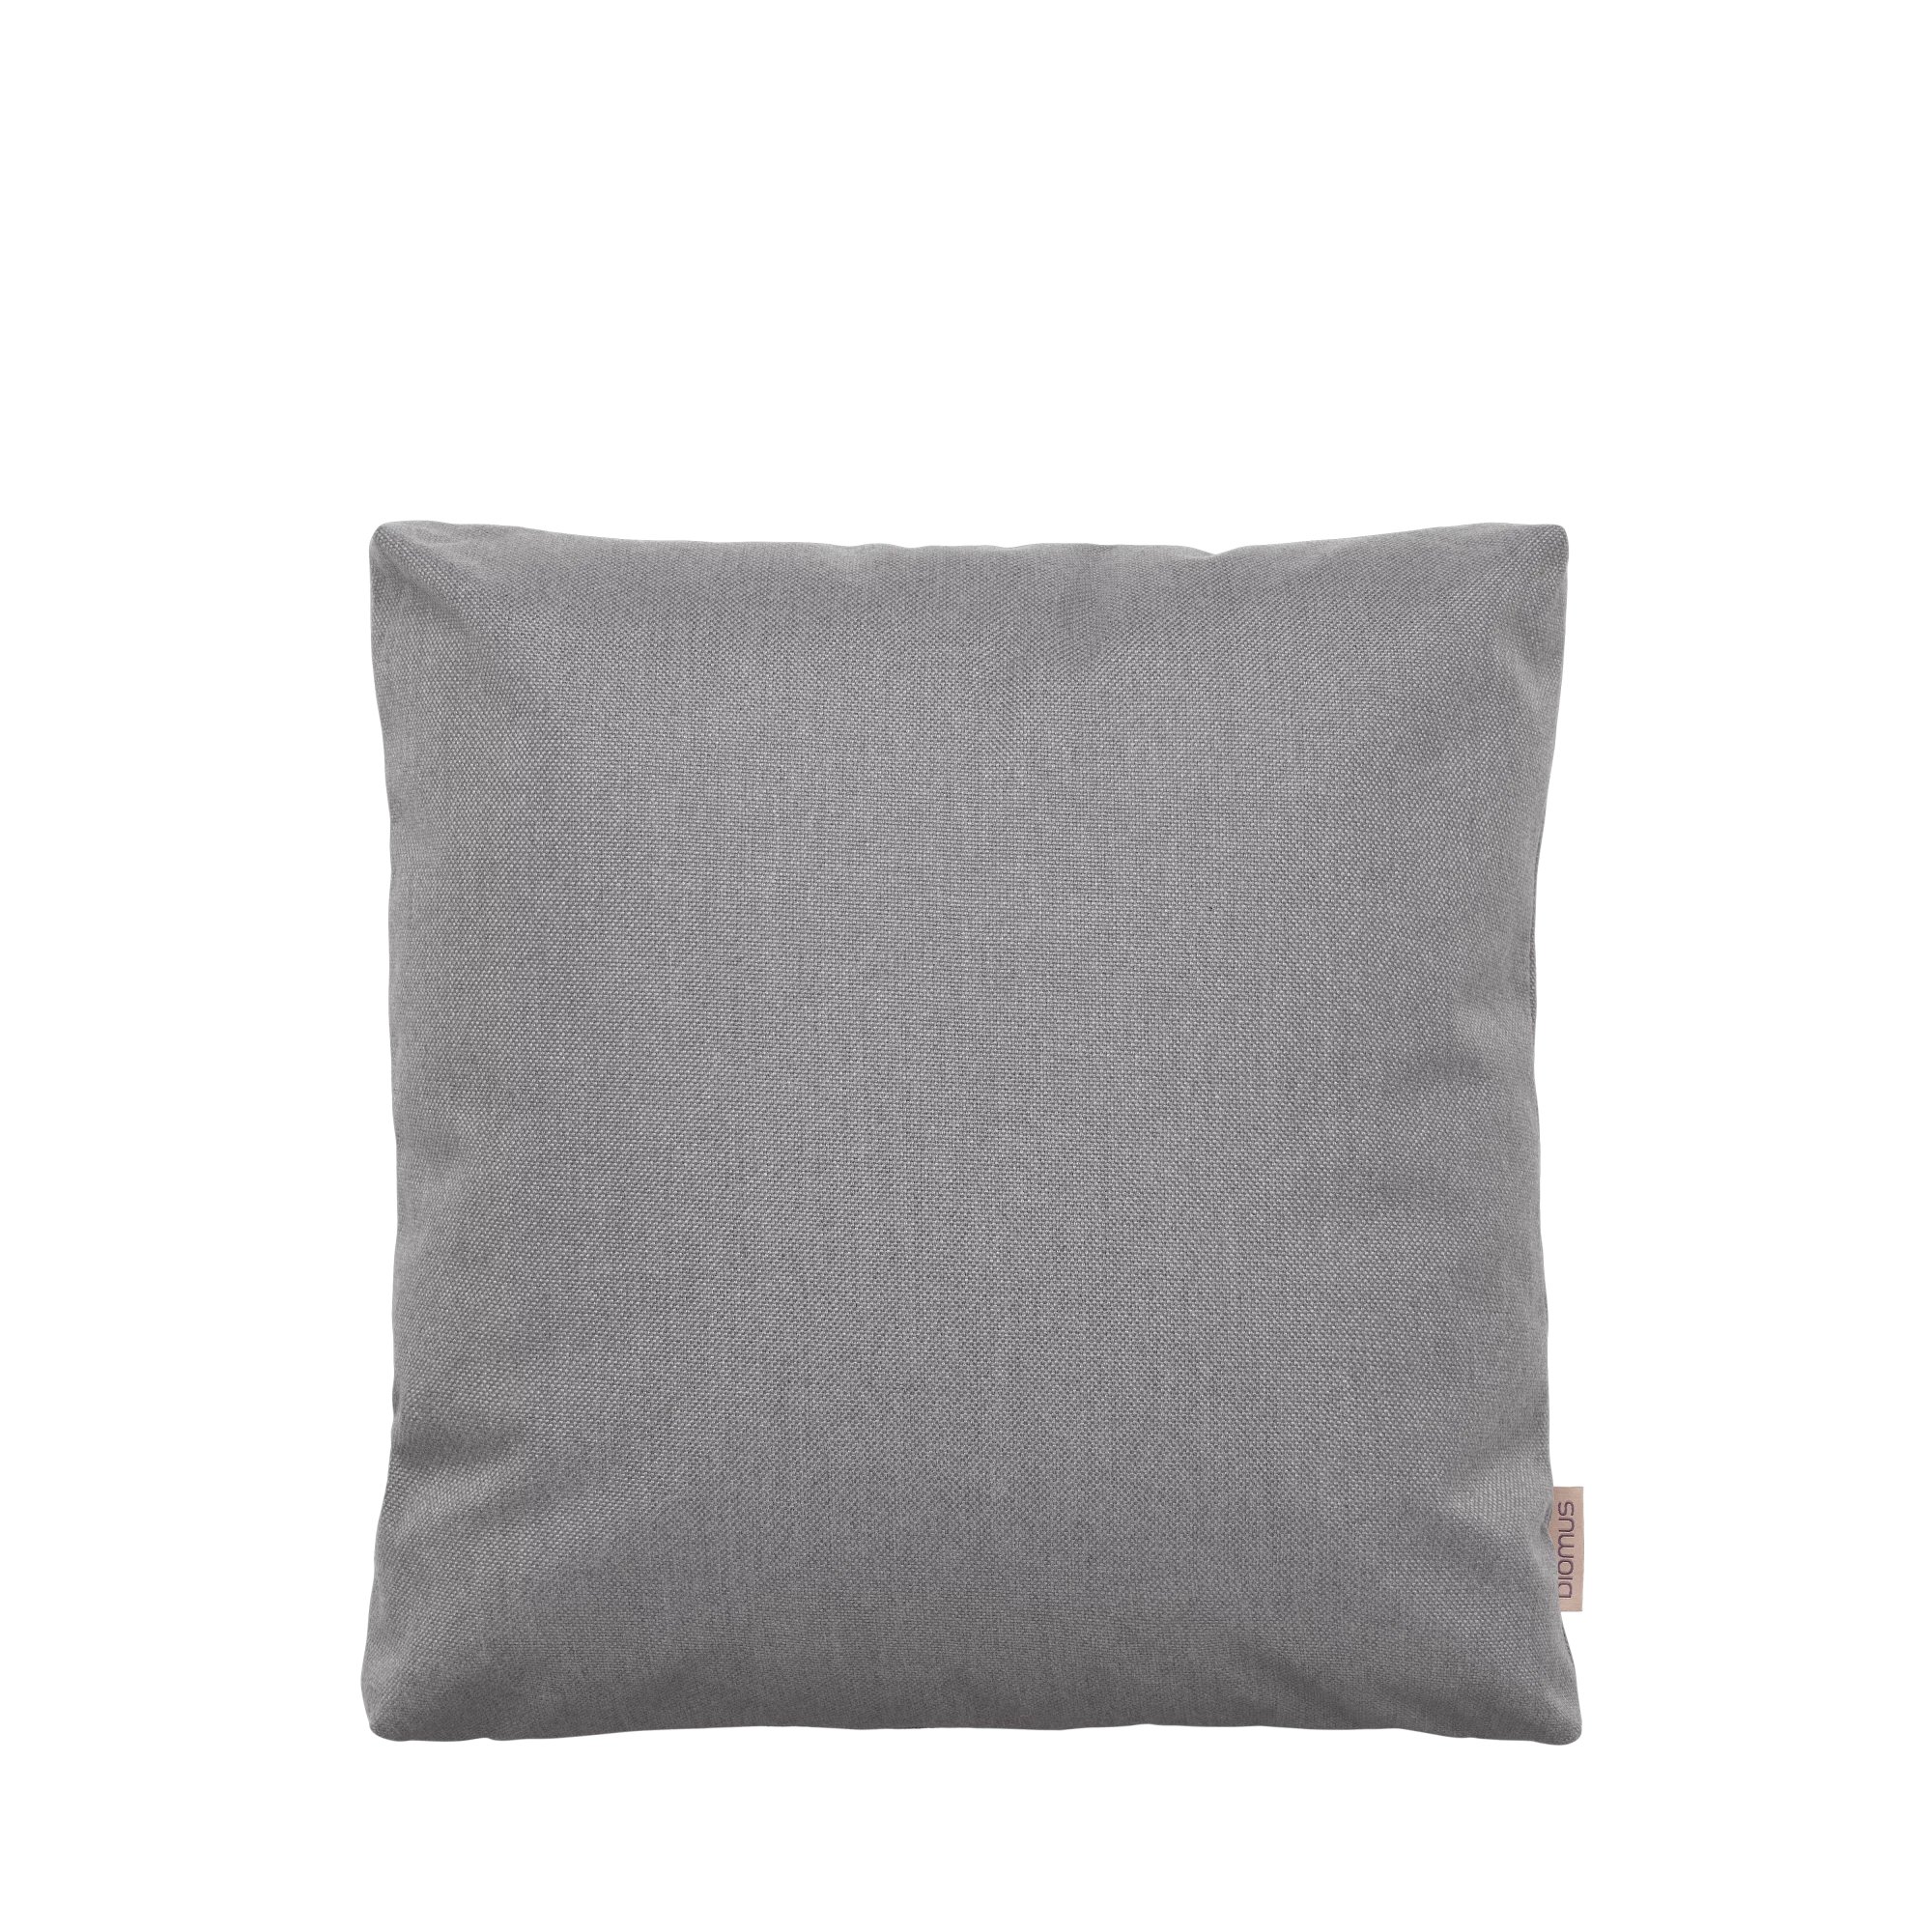 BLOMUS // STAY - OUTDOOR PILLOW | 45 x 45 cm | STONE